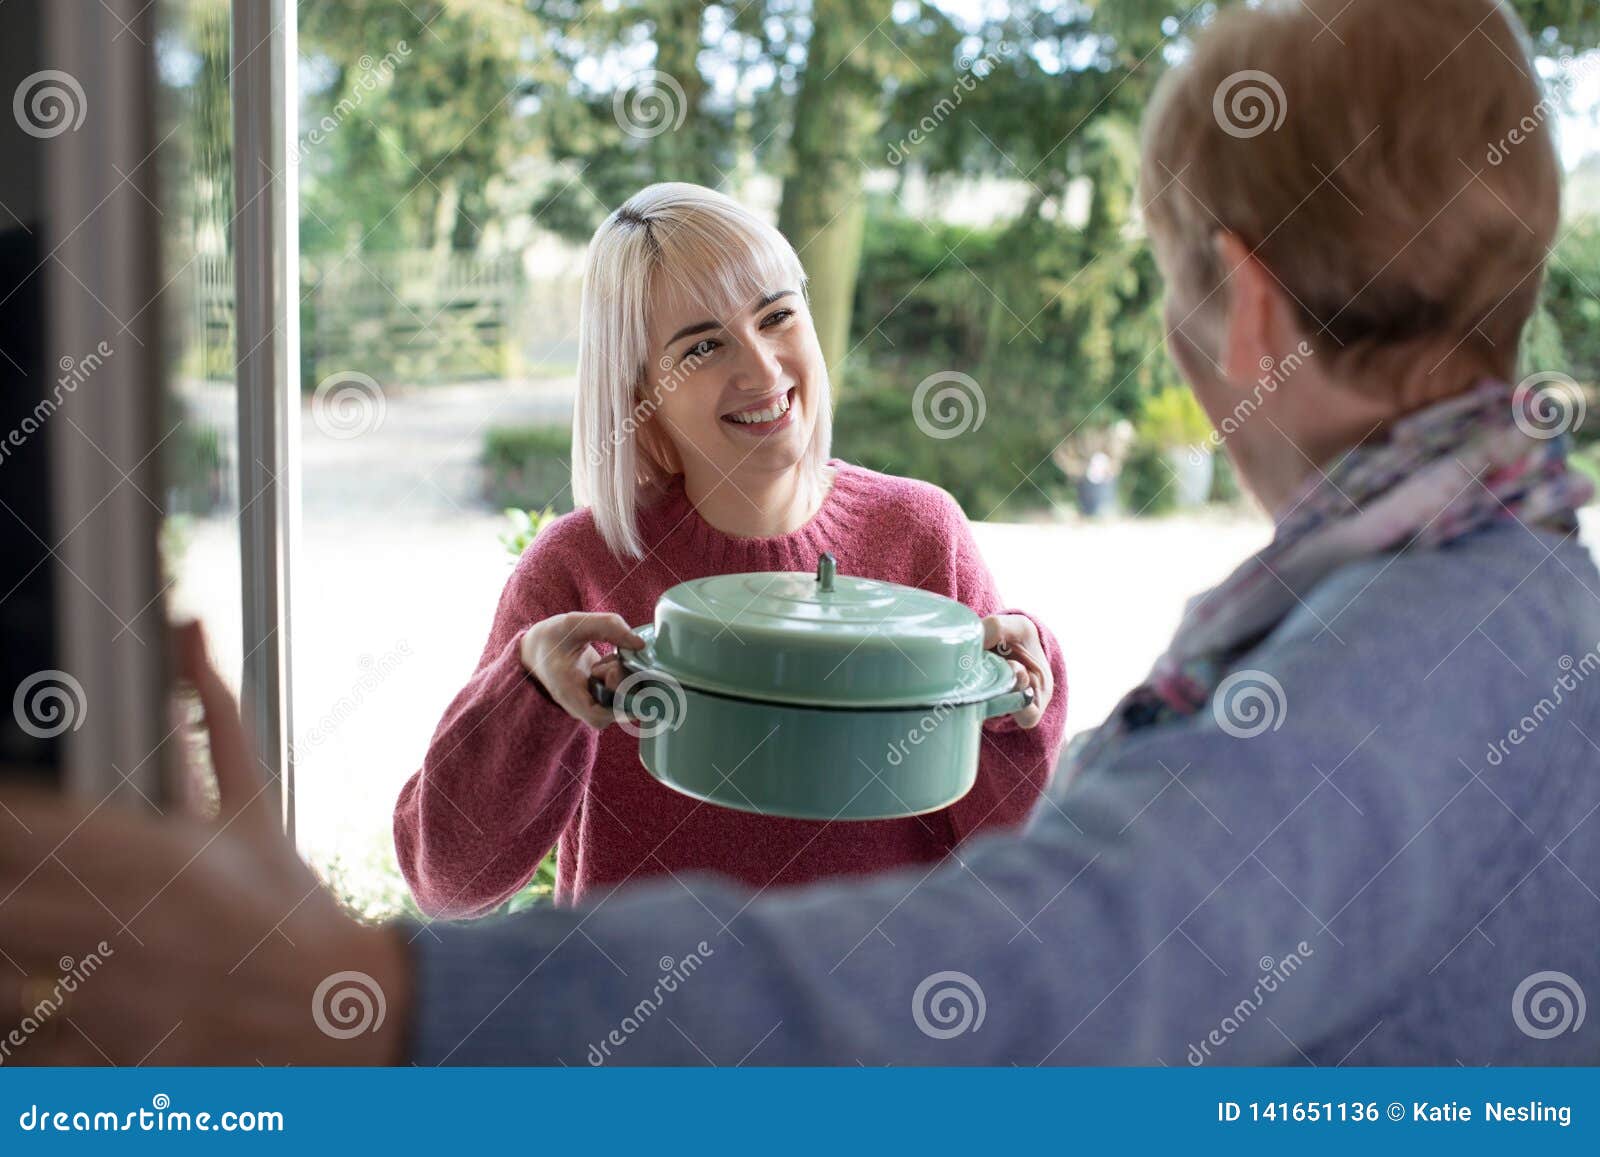 woman bringing meal for elderly neighbour